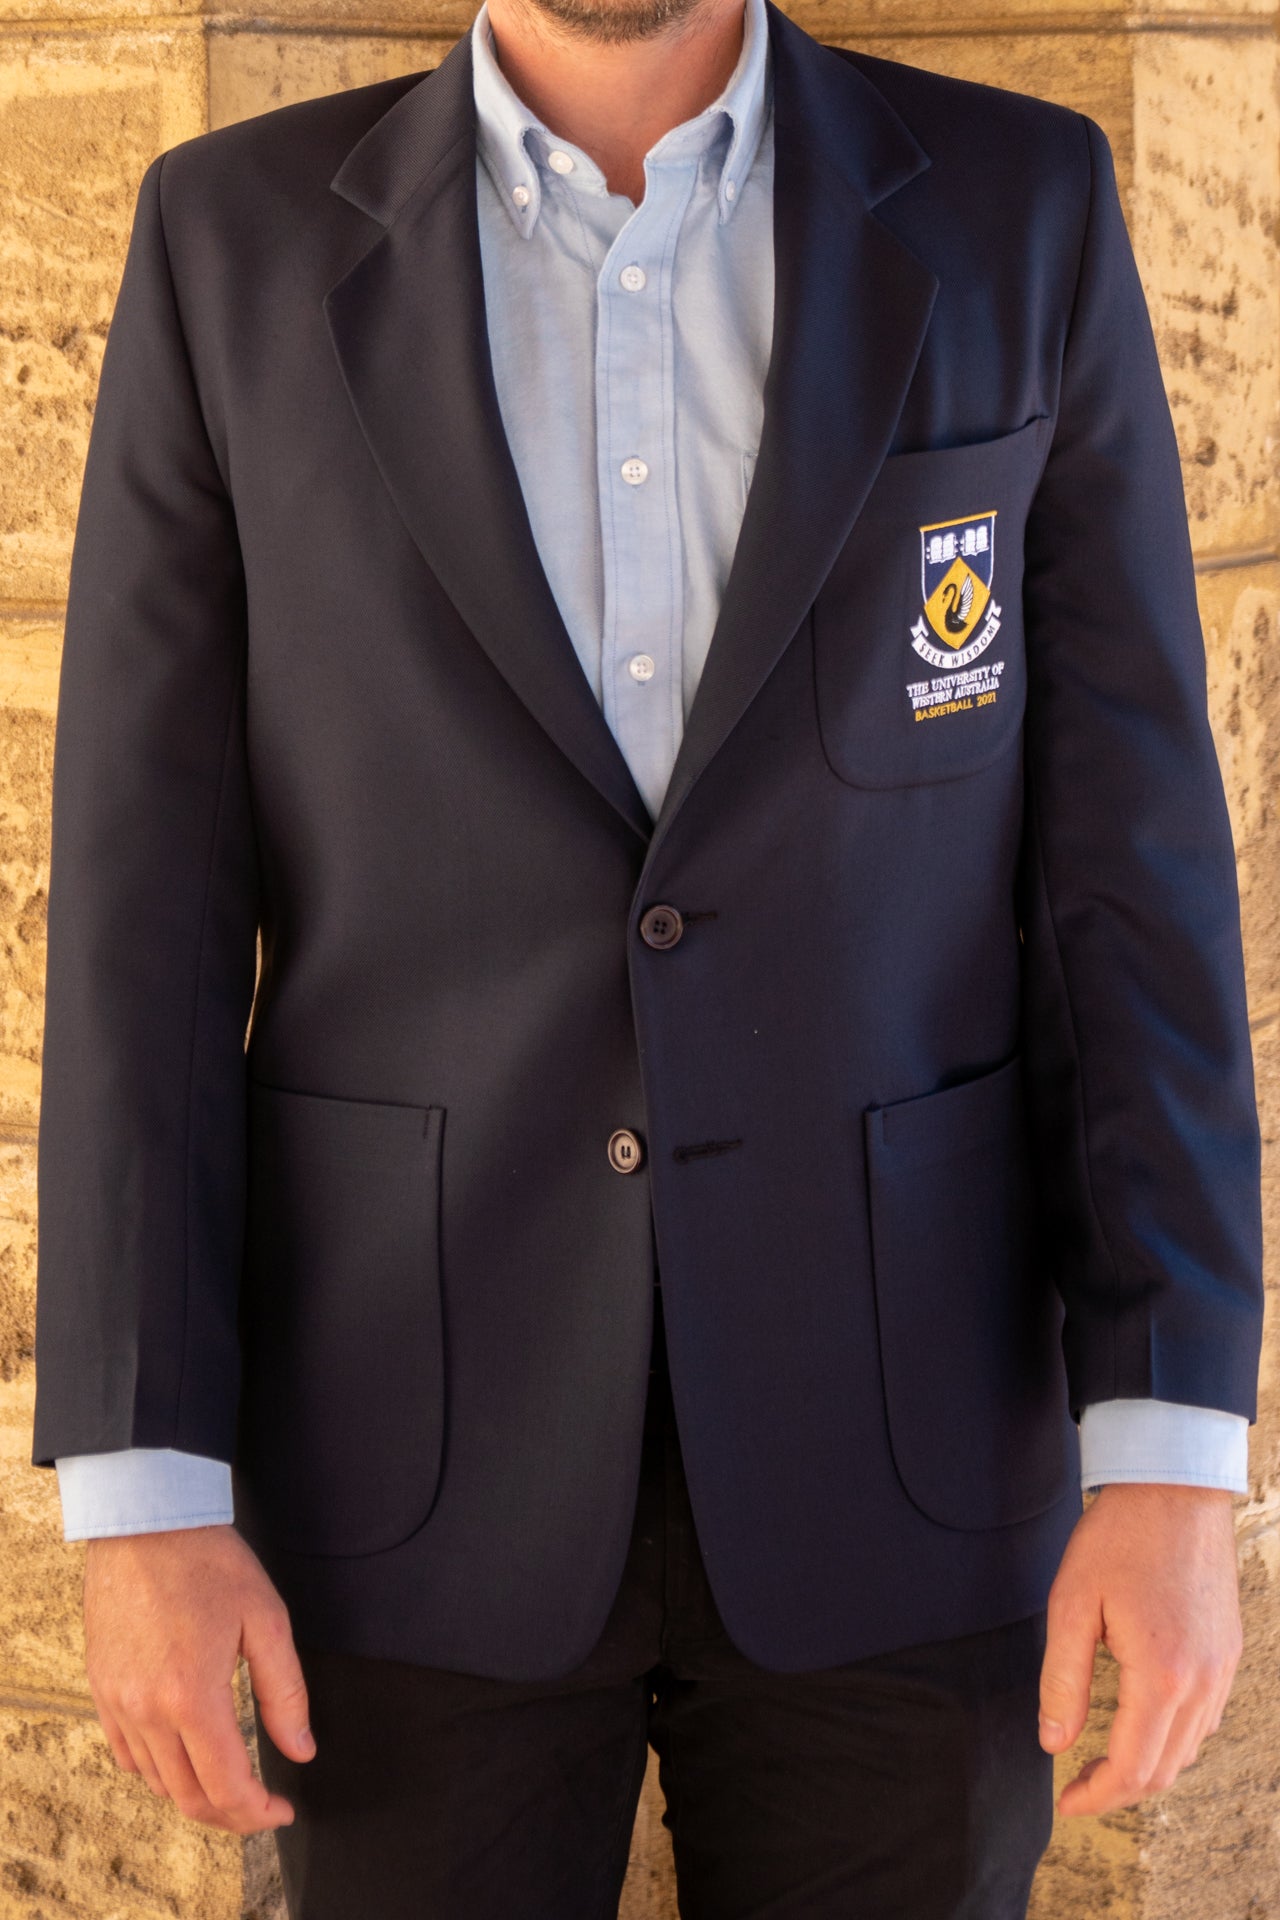 A front view of a man wearing the UWA Blues Blazer.